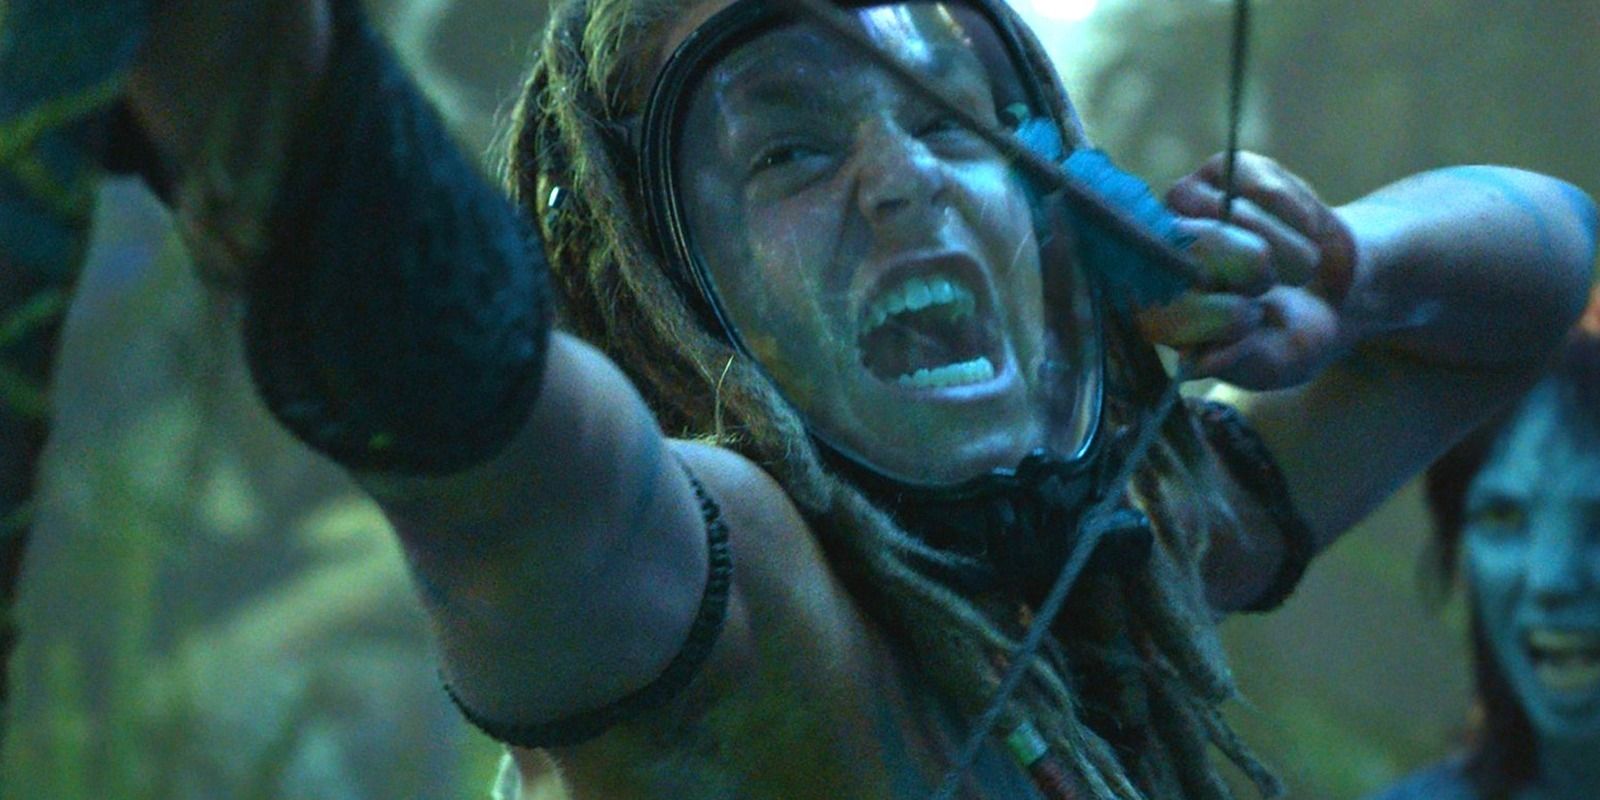 Jack Champion as Spider in Avatar: The Way of Water